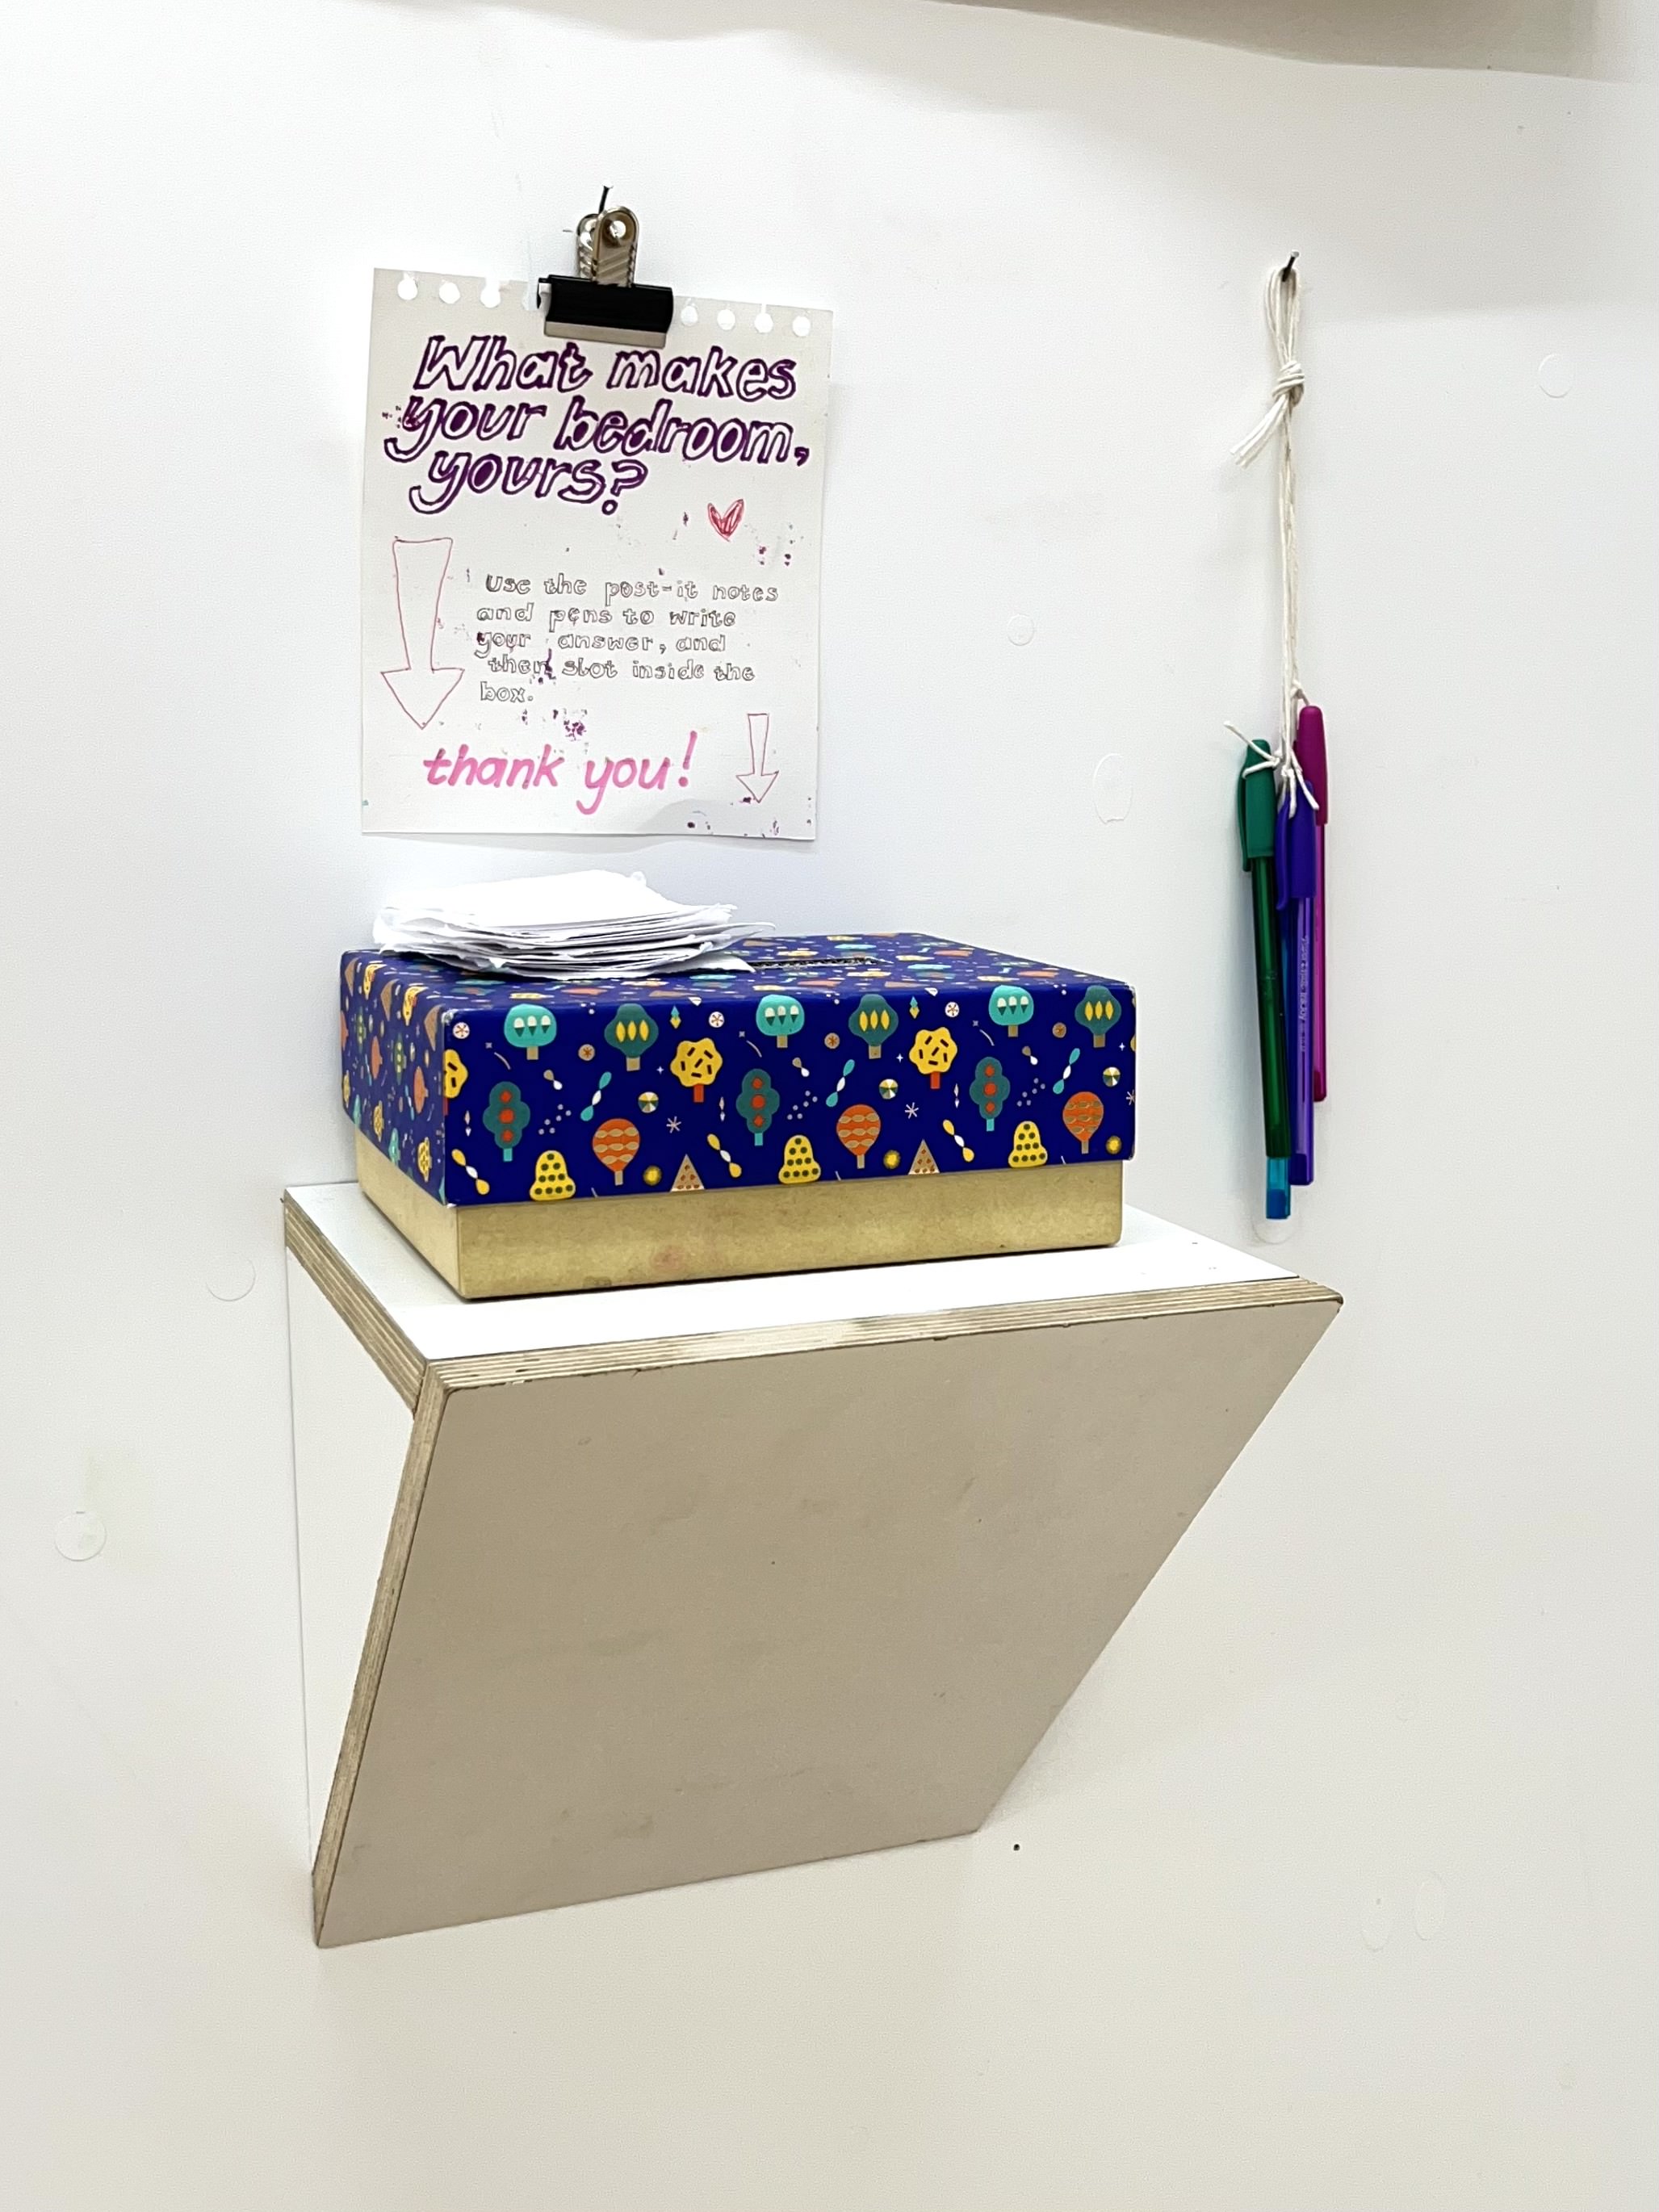 Interactive question box to physically collect the audience's responses. Contains a colourful cardboard box with the question, 'What makes your bedroom, yours?'.